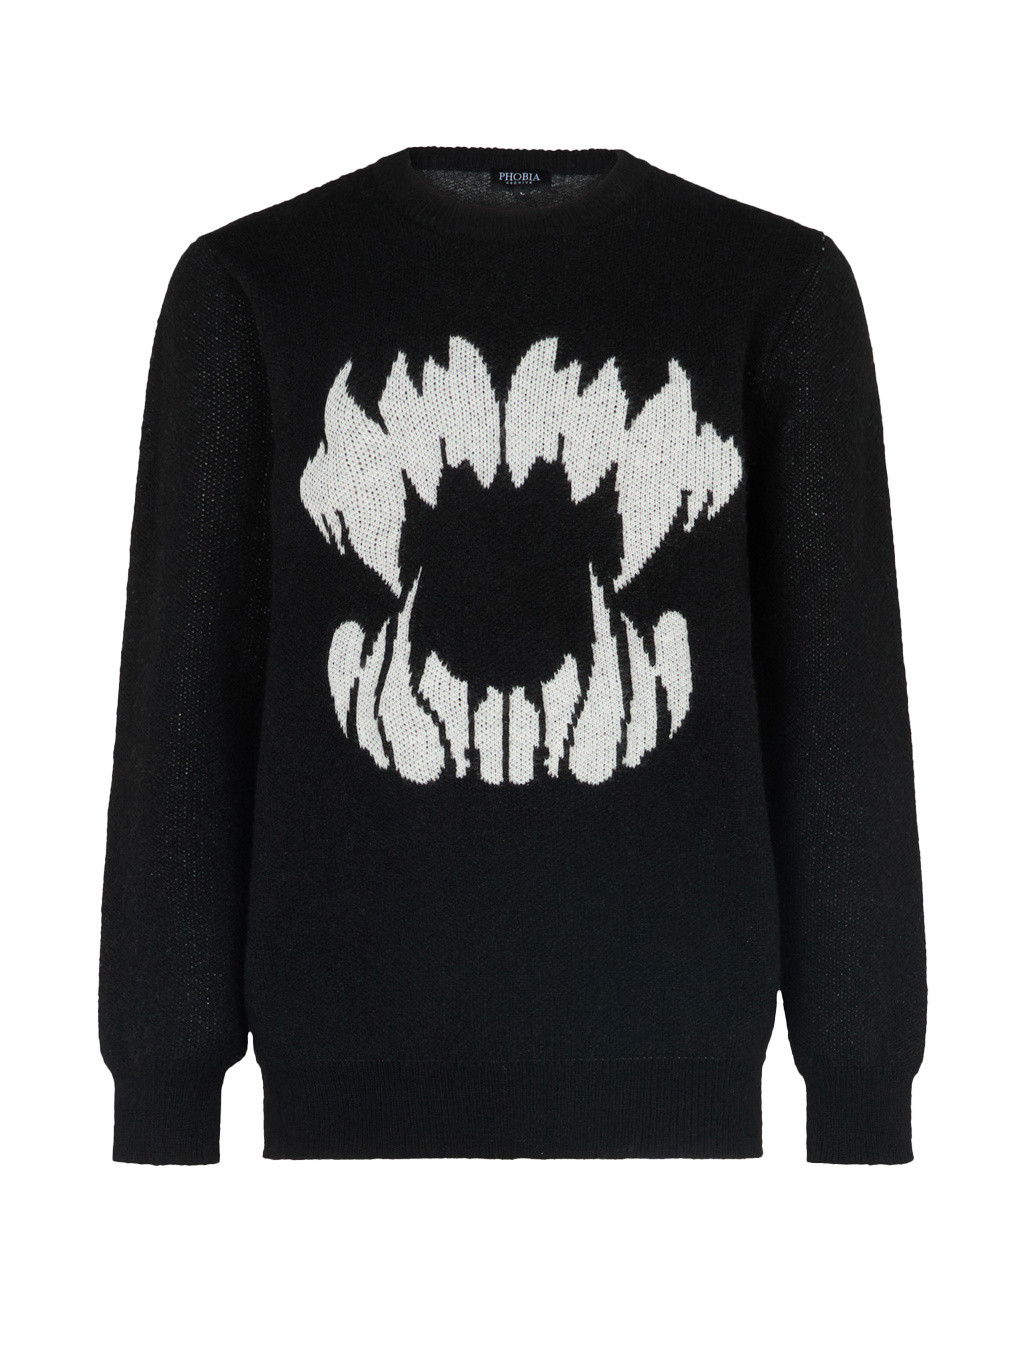 Phobia - Sweater with bite, Black, large image number 0